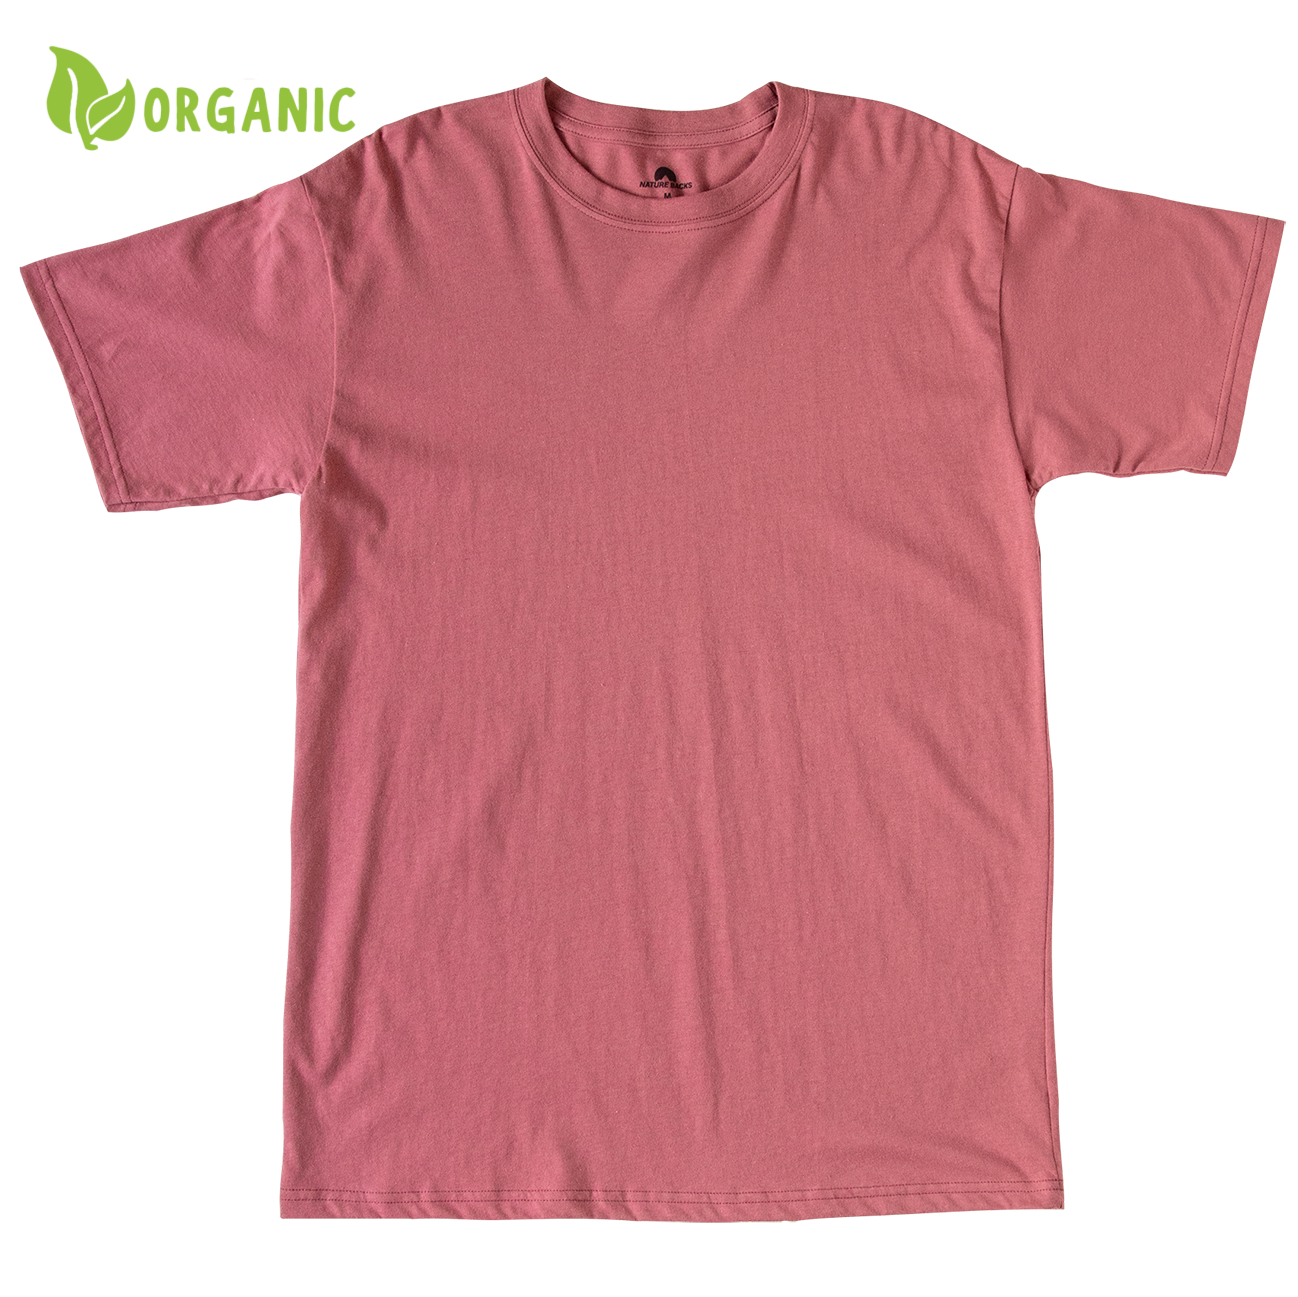 Nature Backs Short Sleeve 100% Organic Cotton T-Shirt | Minimalist Cumin Short Sleeve made with Eco-Friendly Fibers Sustainably made in the USA 